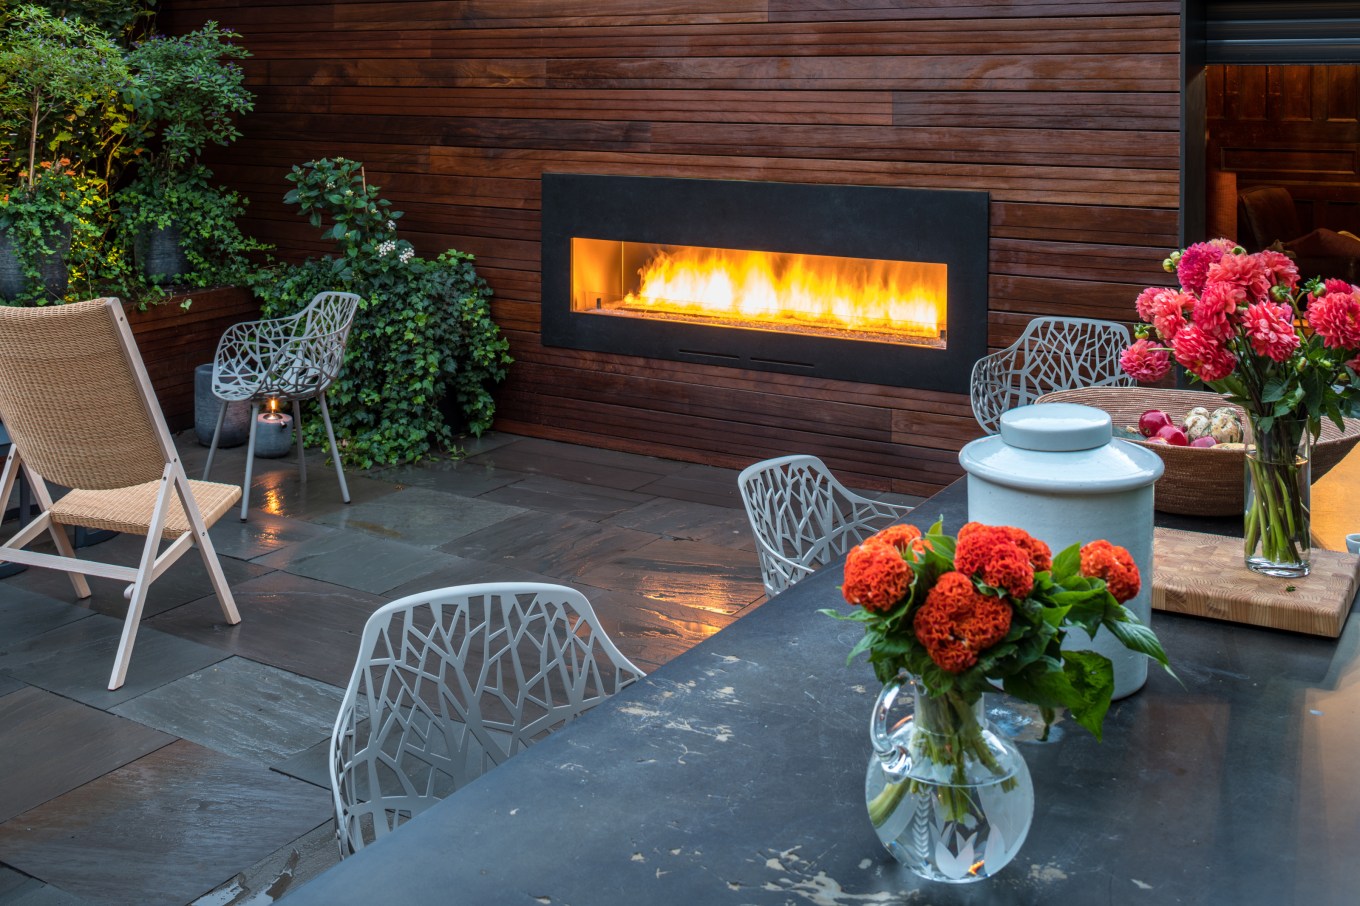 An outdoor fireplace with a backyard garden and a patio with a slated floor.